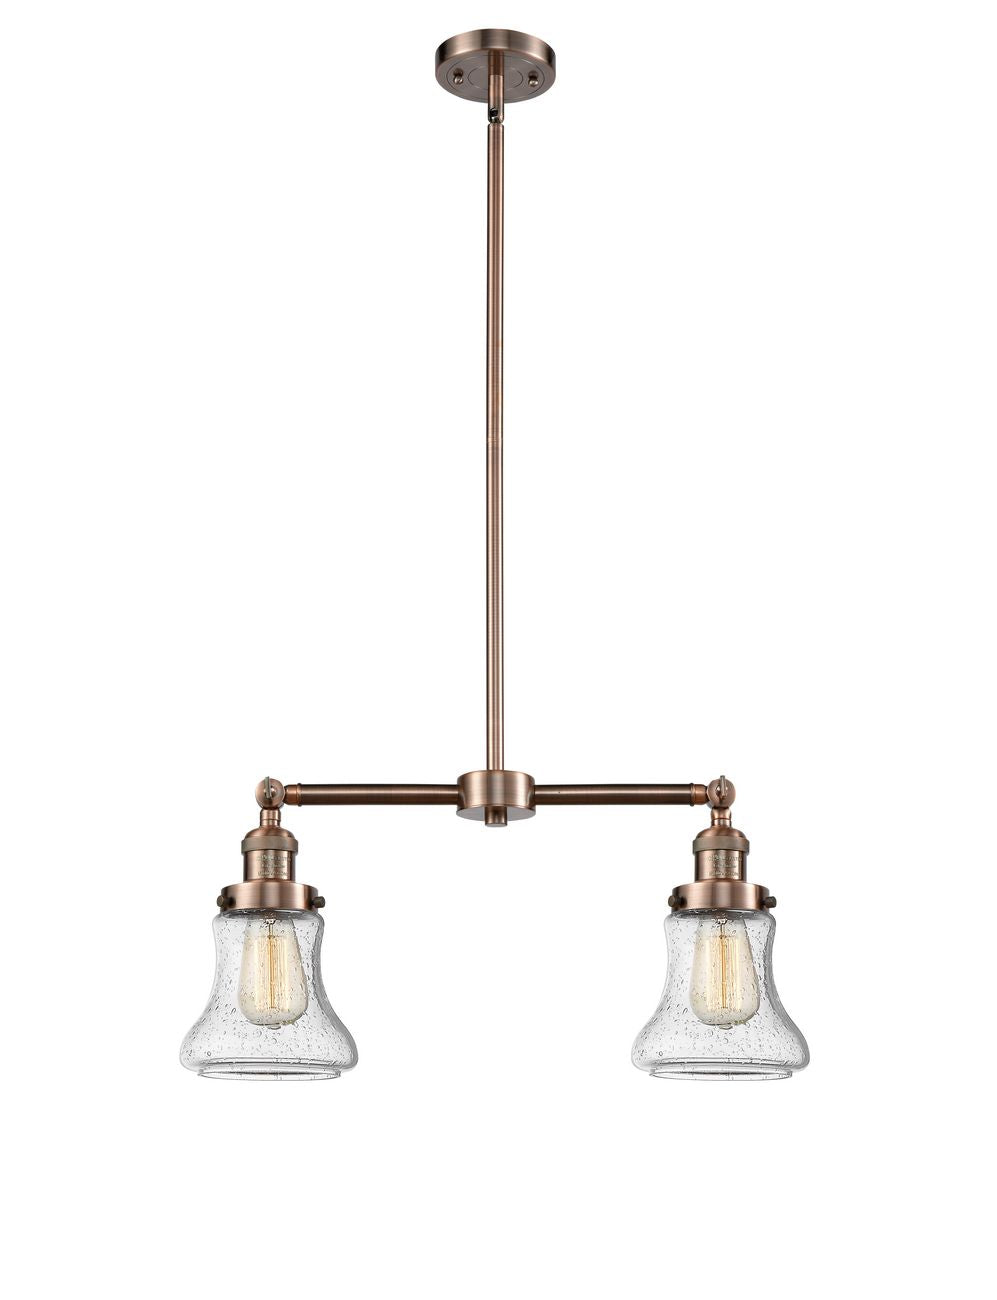 209-AC-G194 2-Light 21" Antique Copper Island Light - Seedy Bellmont Glass - LED Bulb - Dimmensions: 21 x 5 x 10<br>Minimum Height : 21.375<br>Maximum Height : 45.375 - Sloped Ceiling Compatible: Yes